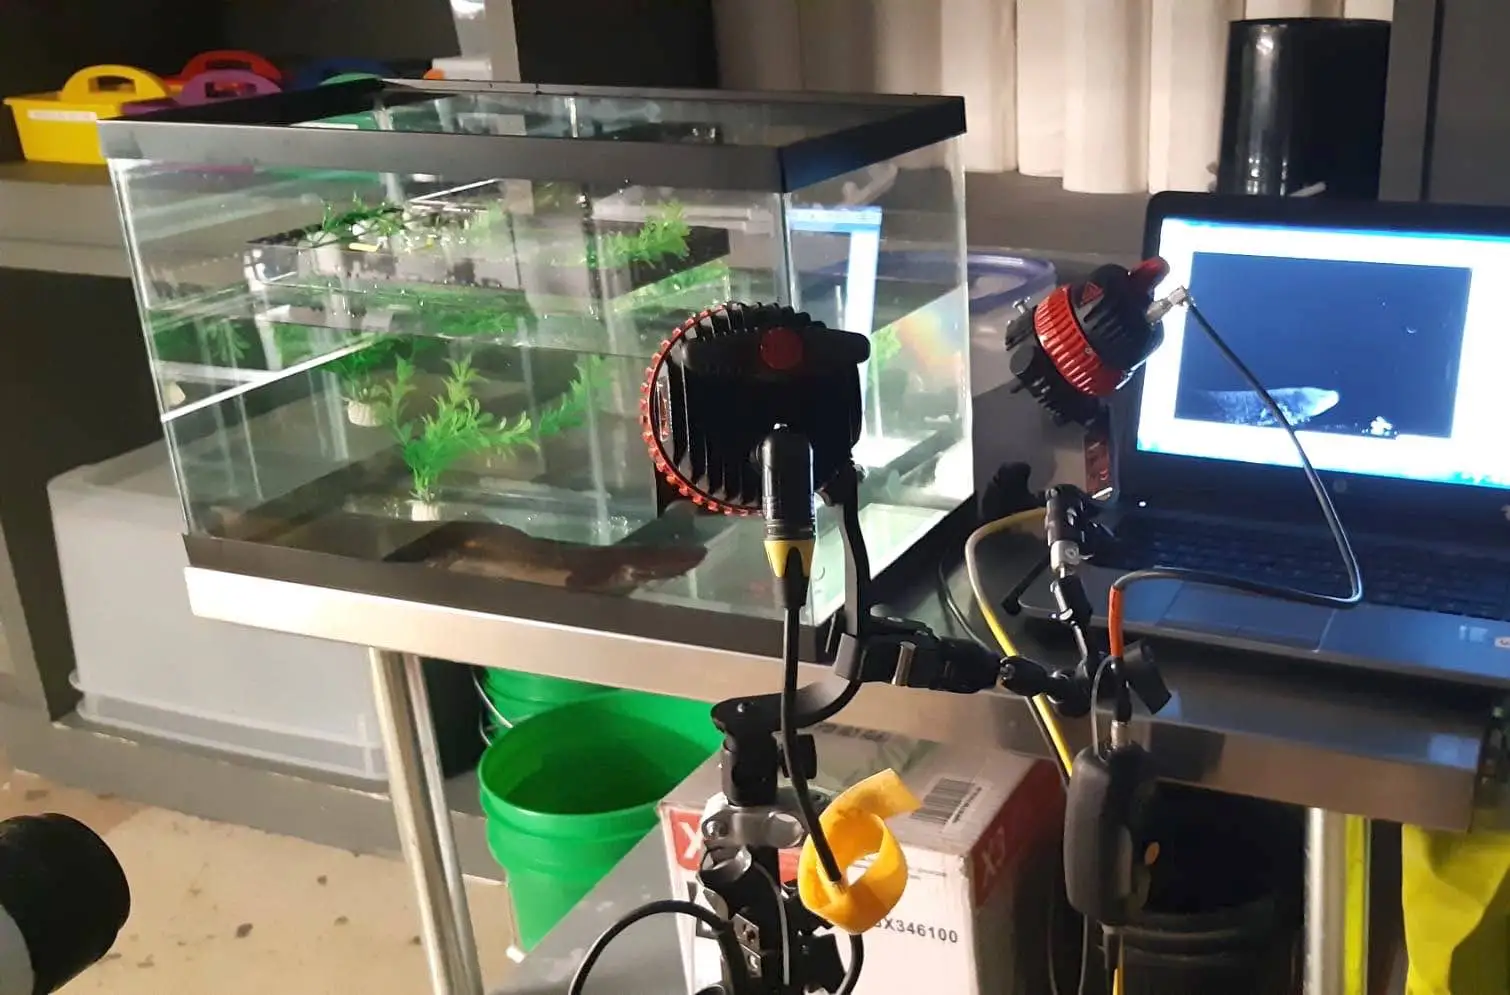 A filming setup of a water-filled tank with a salamander next to a computer with camera and lights